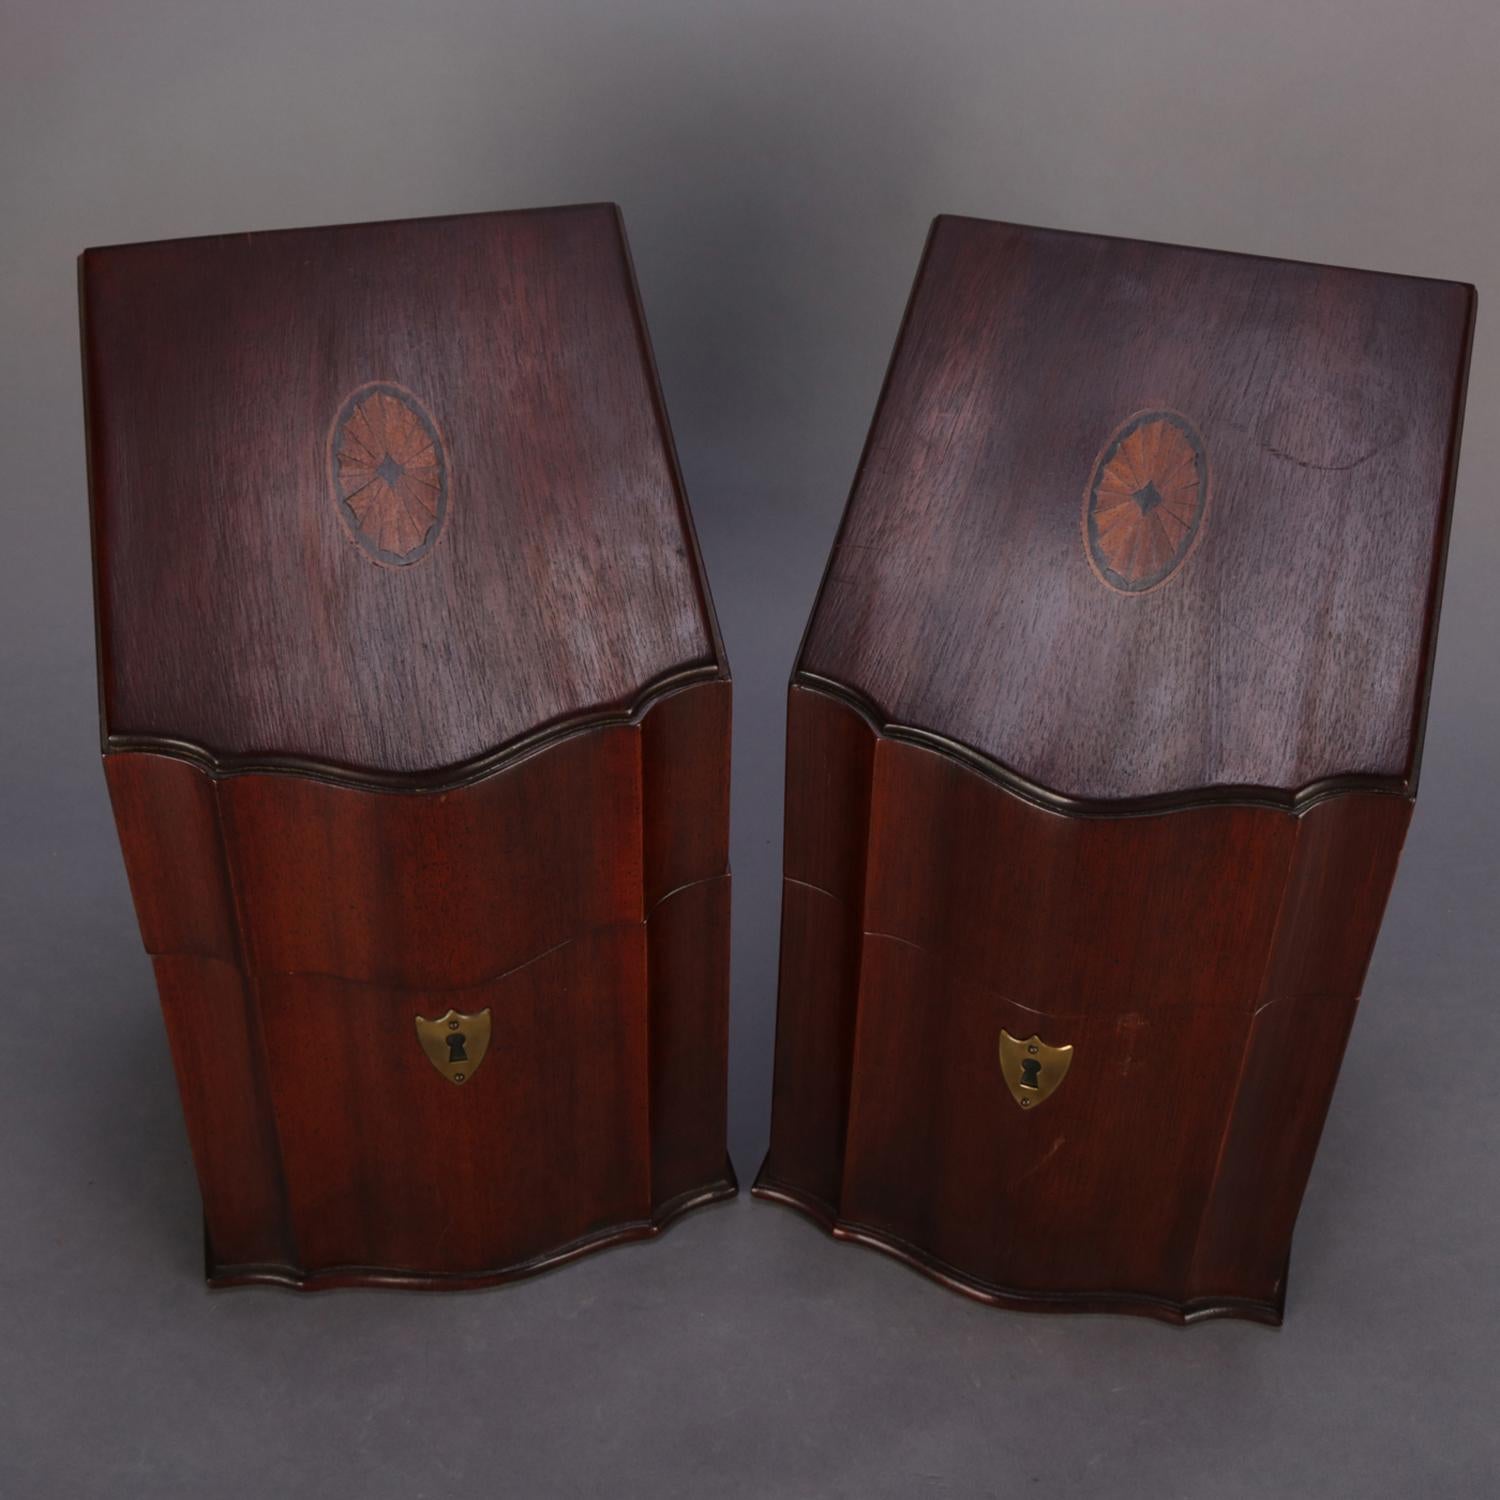 A pair of English Georgian knife boxes feature serpentine form with lid having satinwood inlaid patera and opening to interior with 12 knife slots, each with shield form bronze decorative escutcheon, 20th century

Measures: overall 13.25